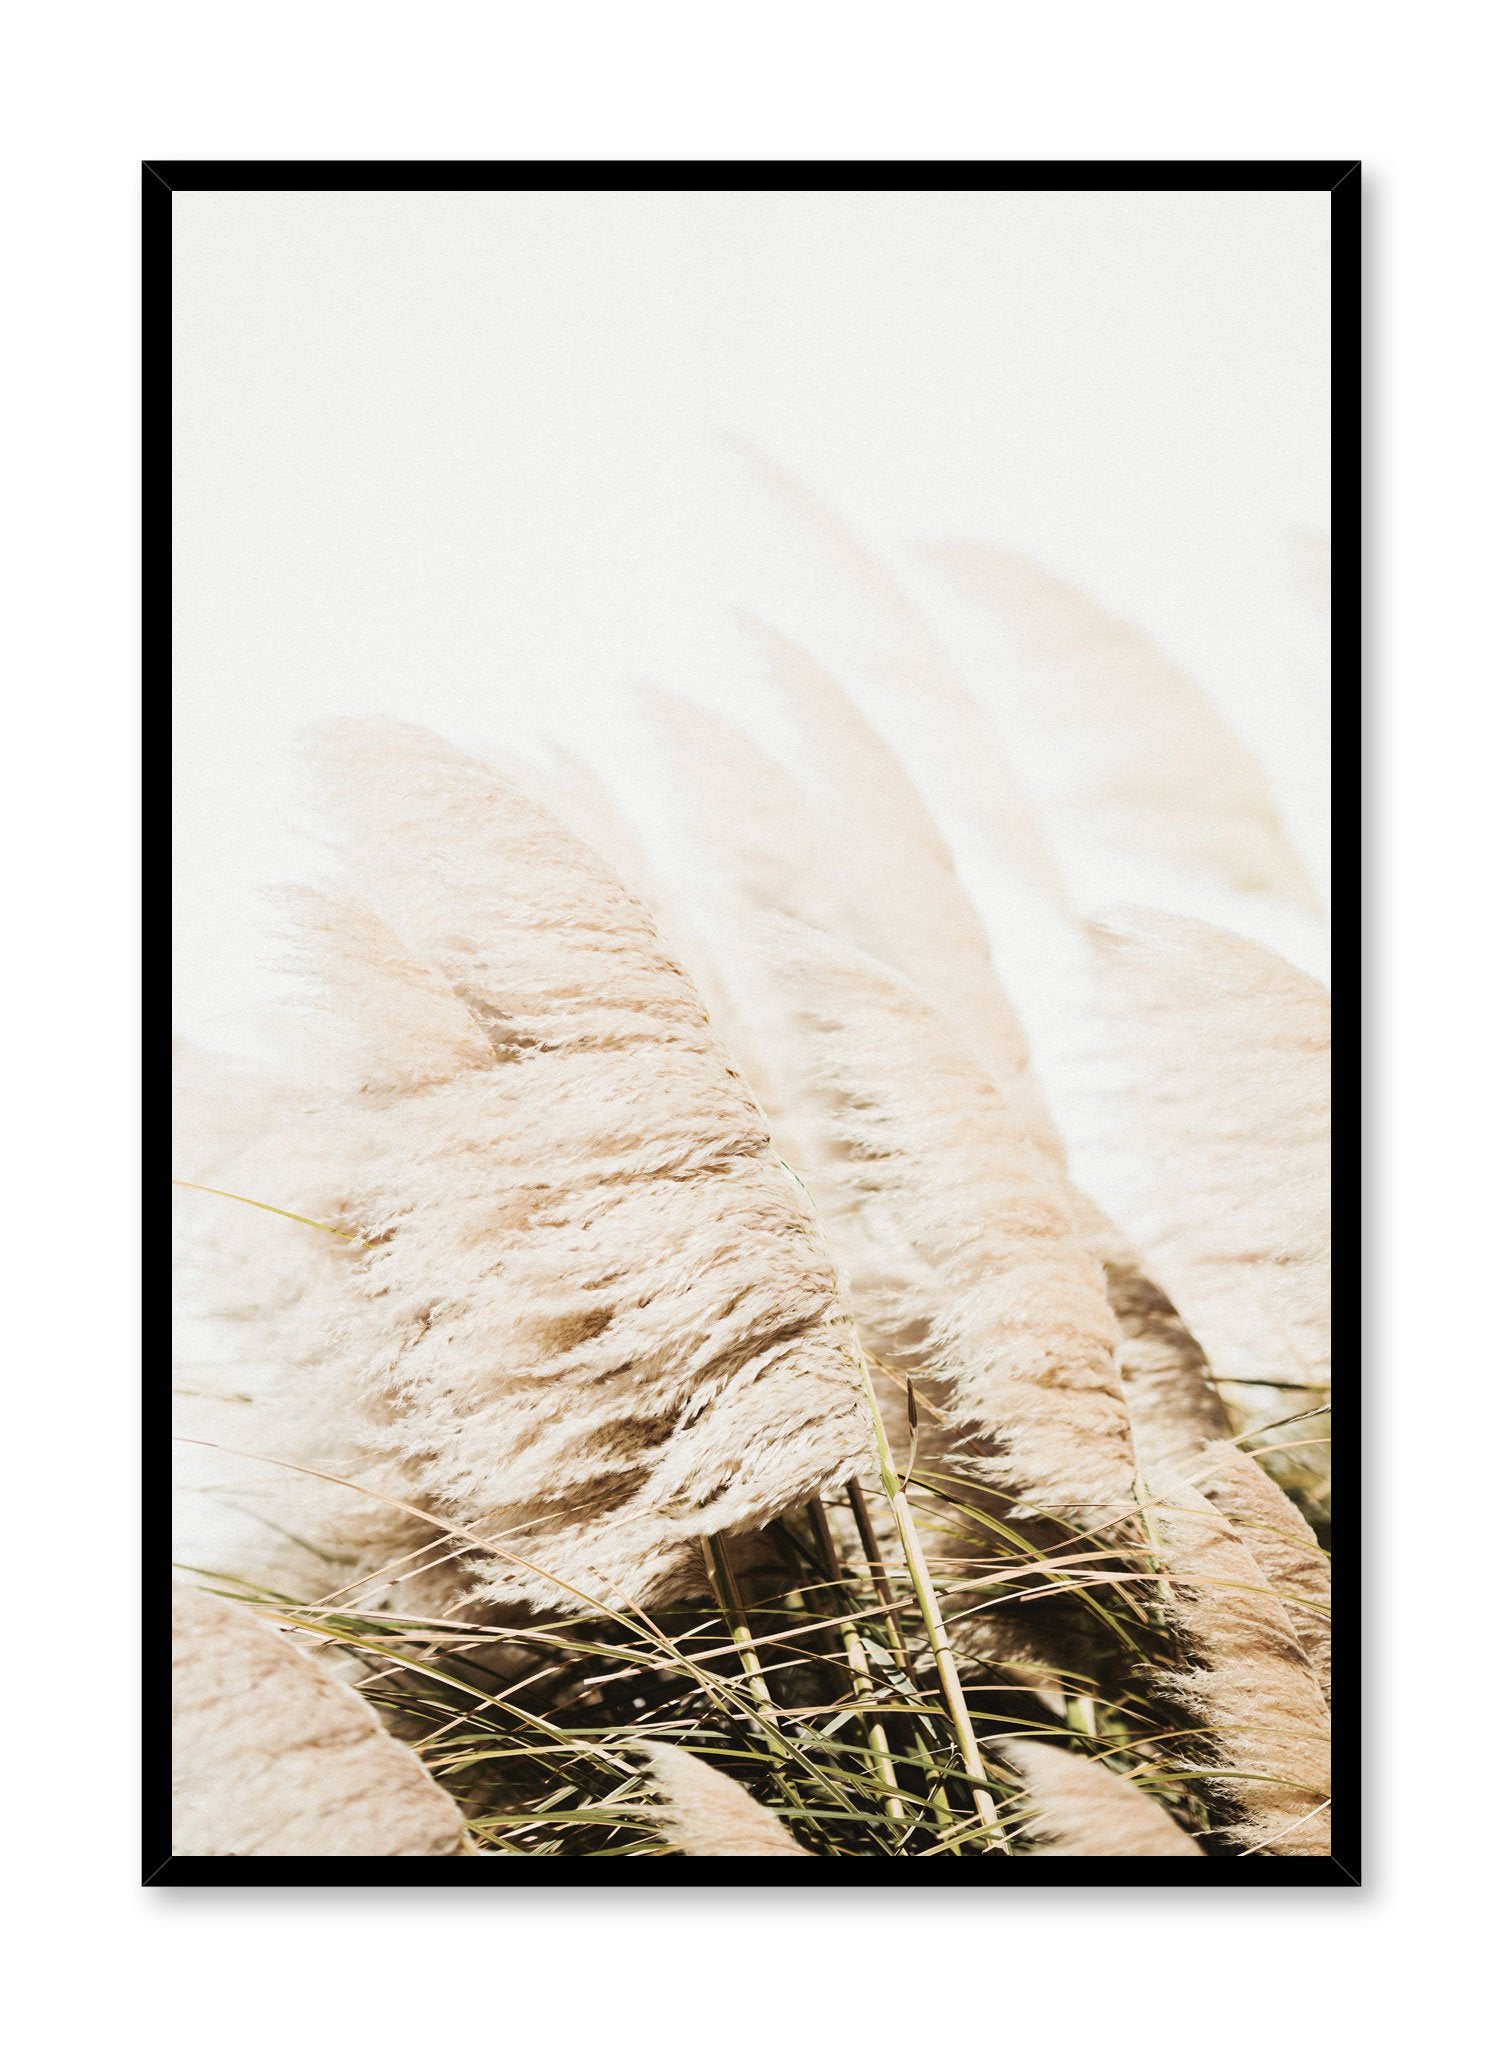 Minimalist design poster by Opposite Wall with wheat field photography